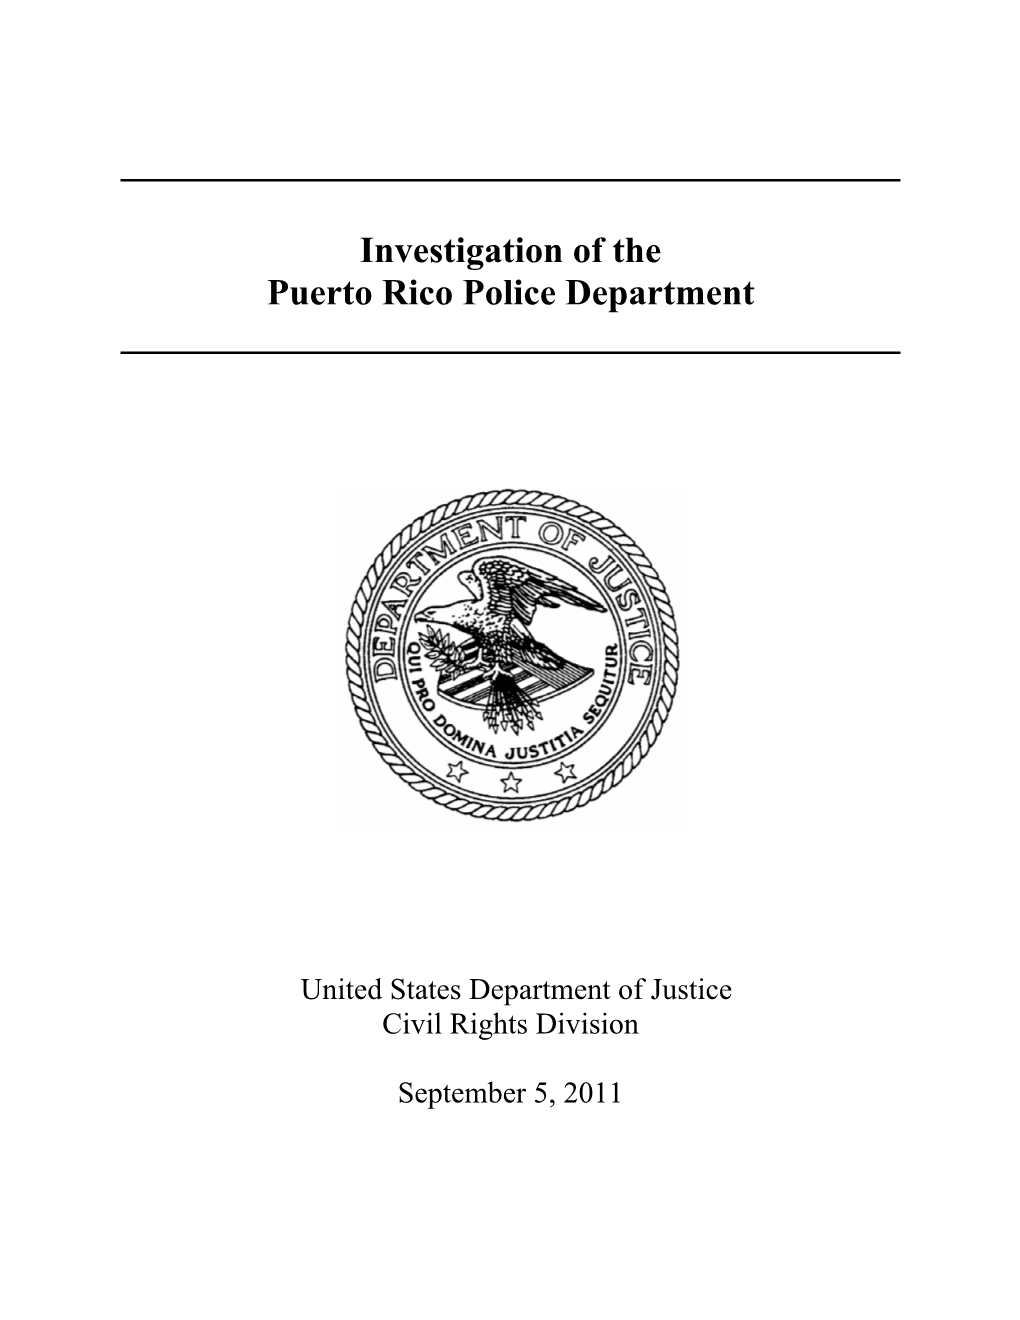 Investigation of the Puerto Rico Police Department